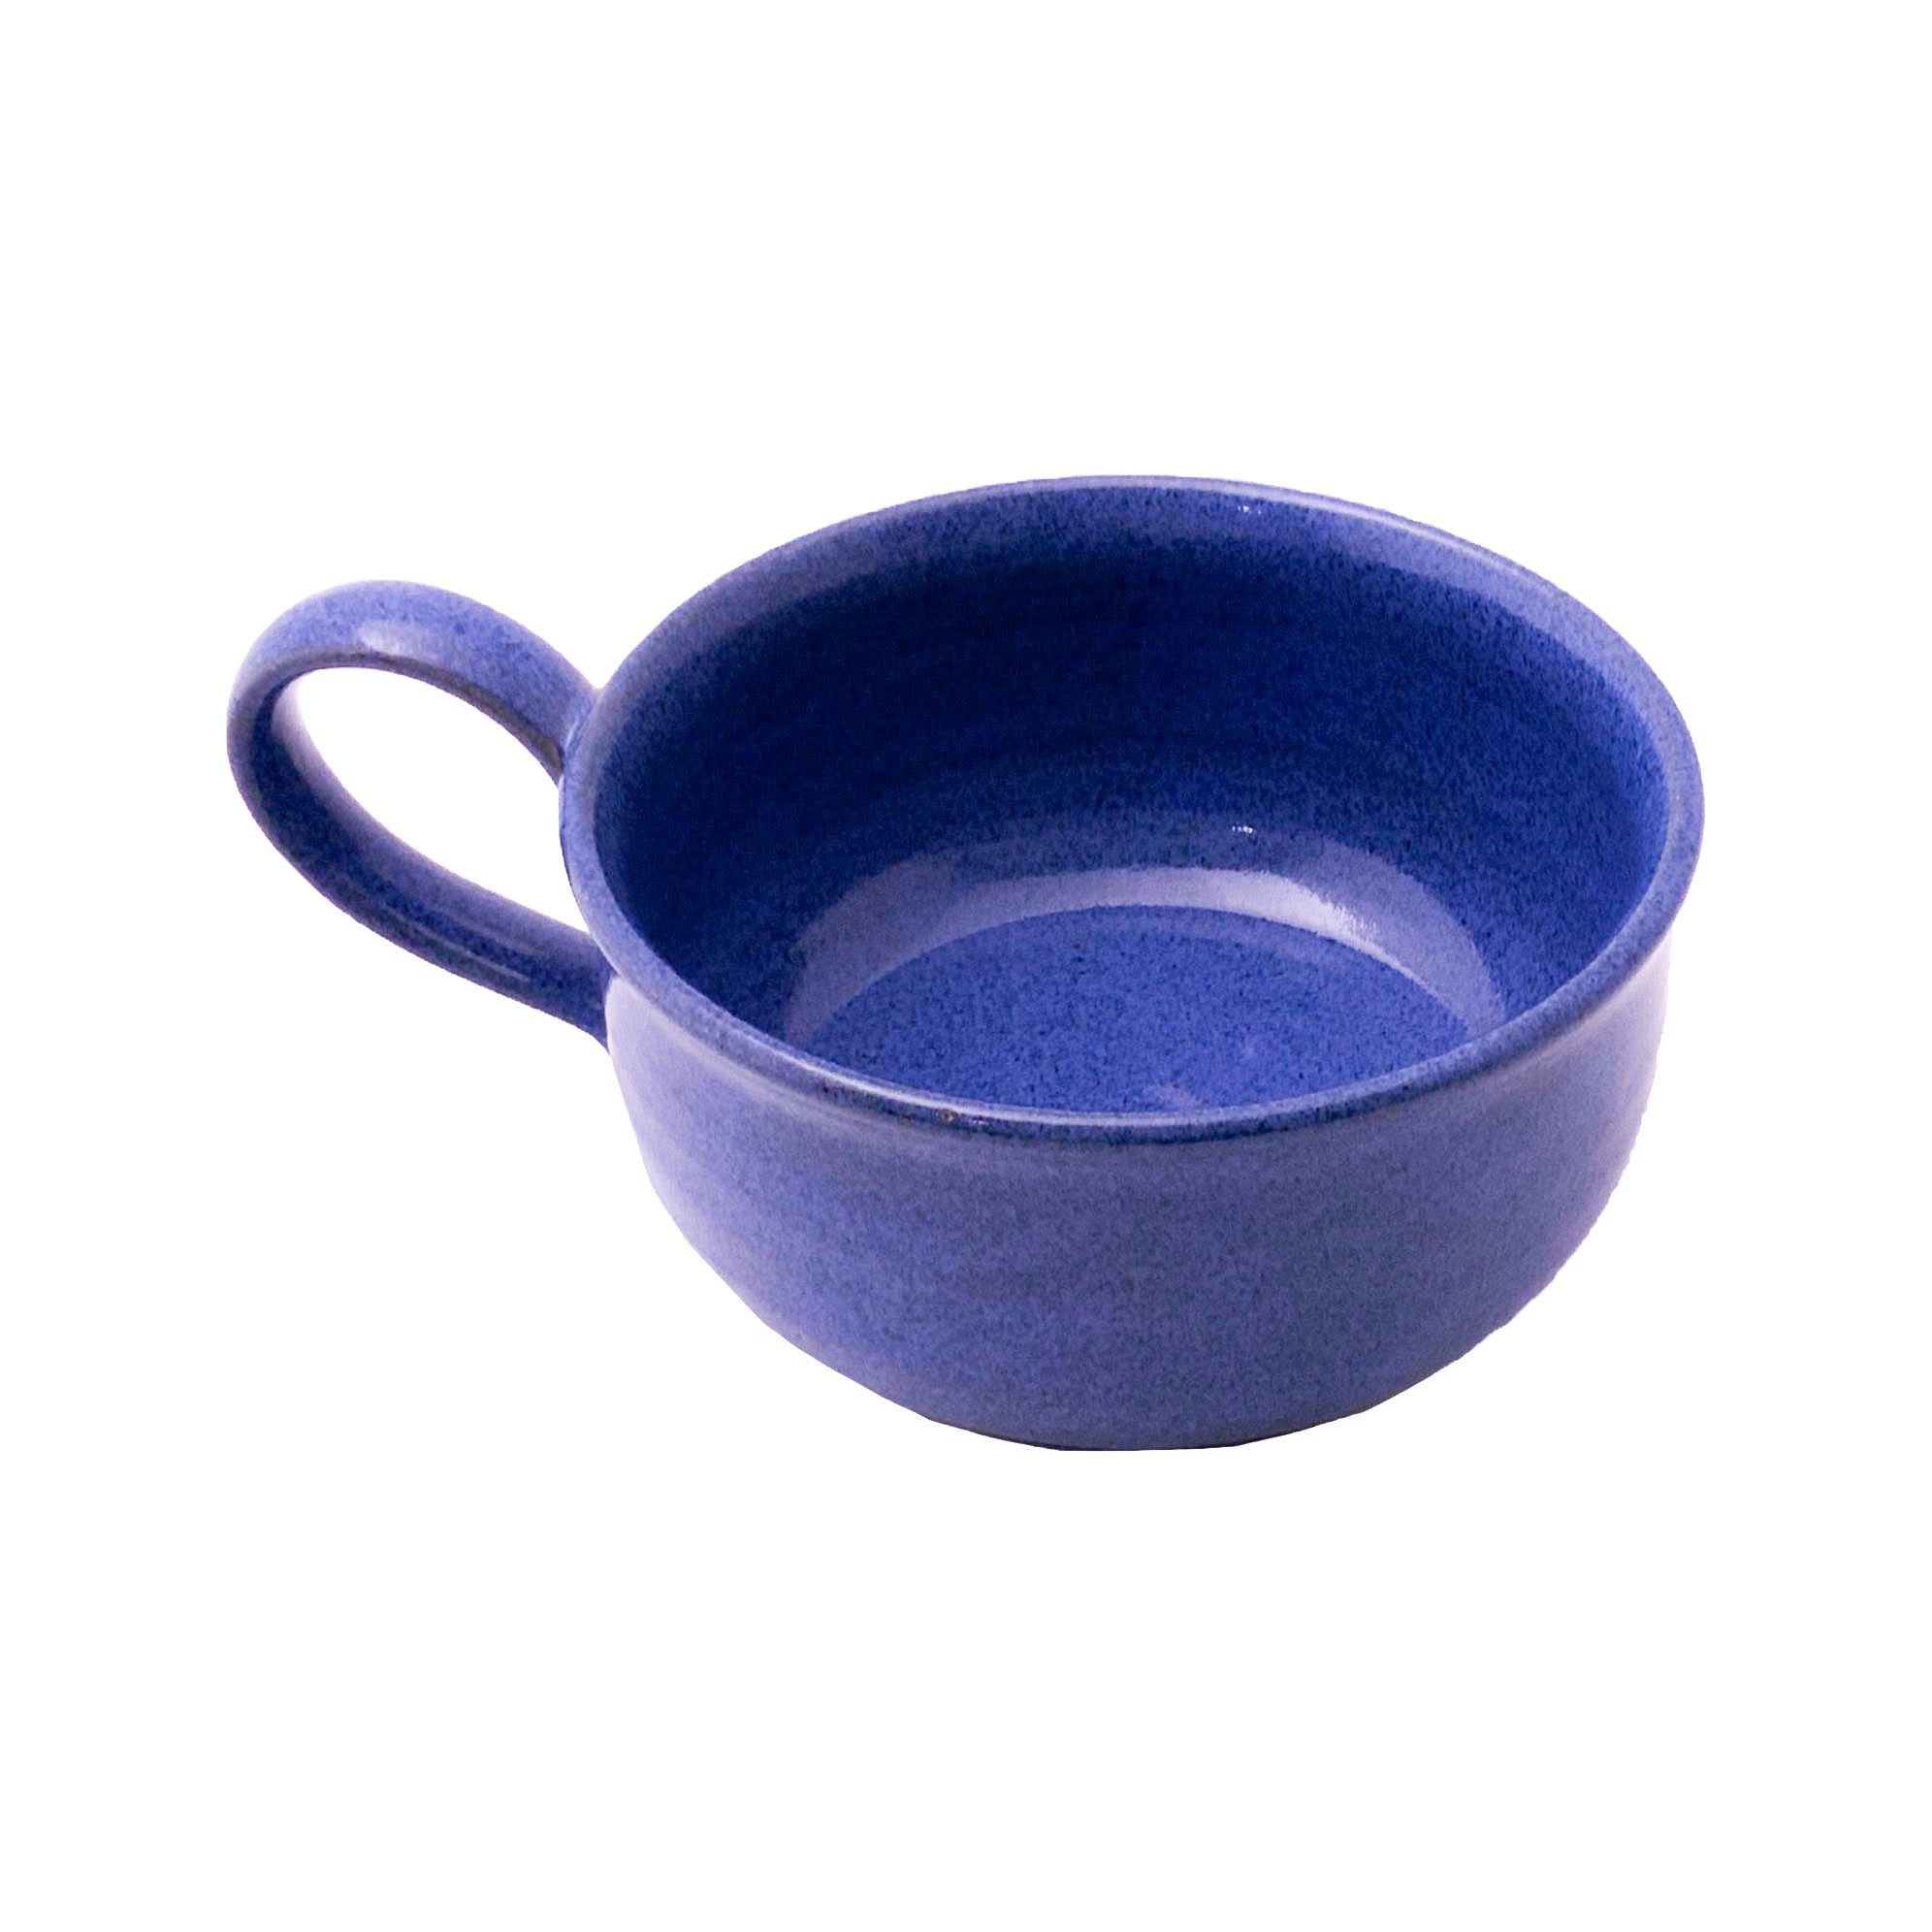 DARK PERIWINKLE SOUP BOWL WITH HANDLE